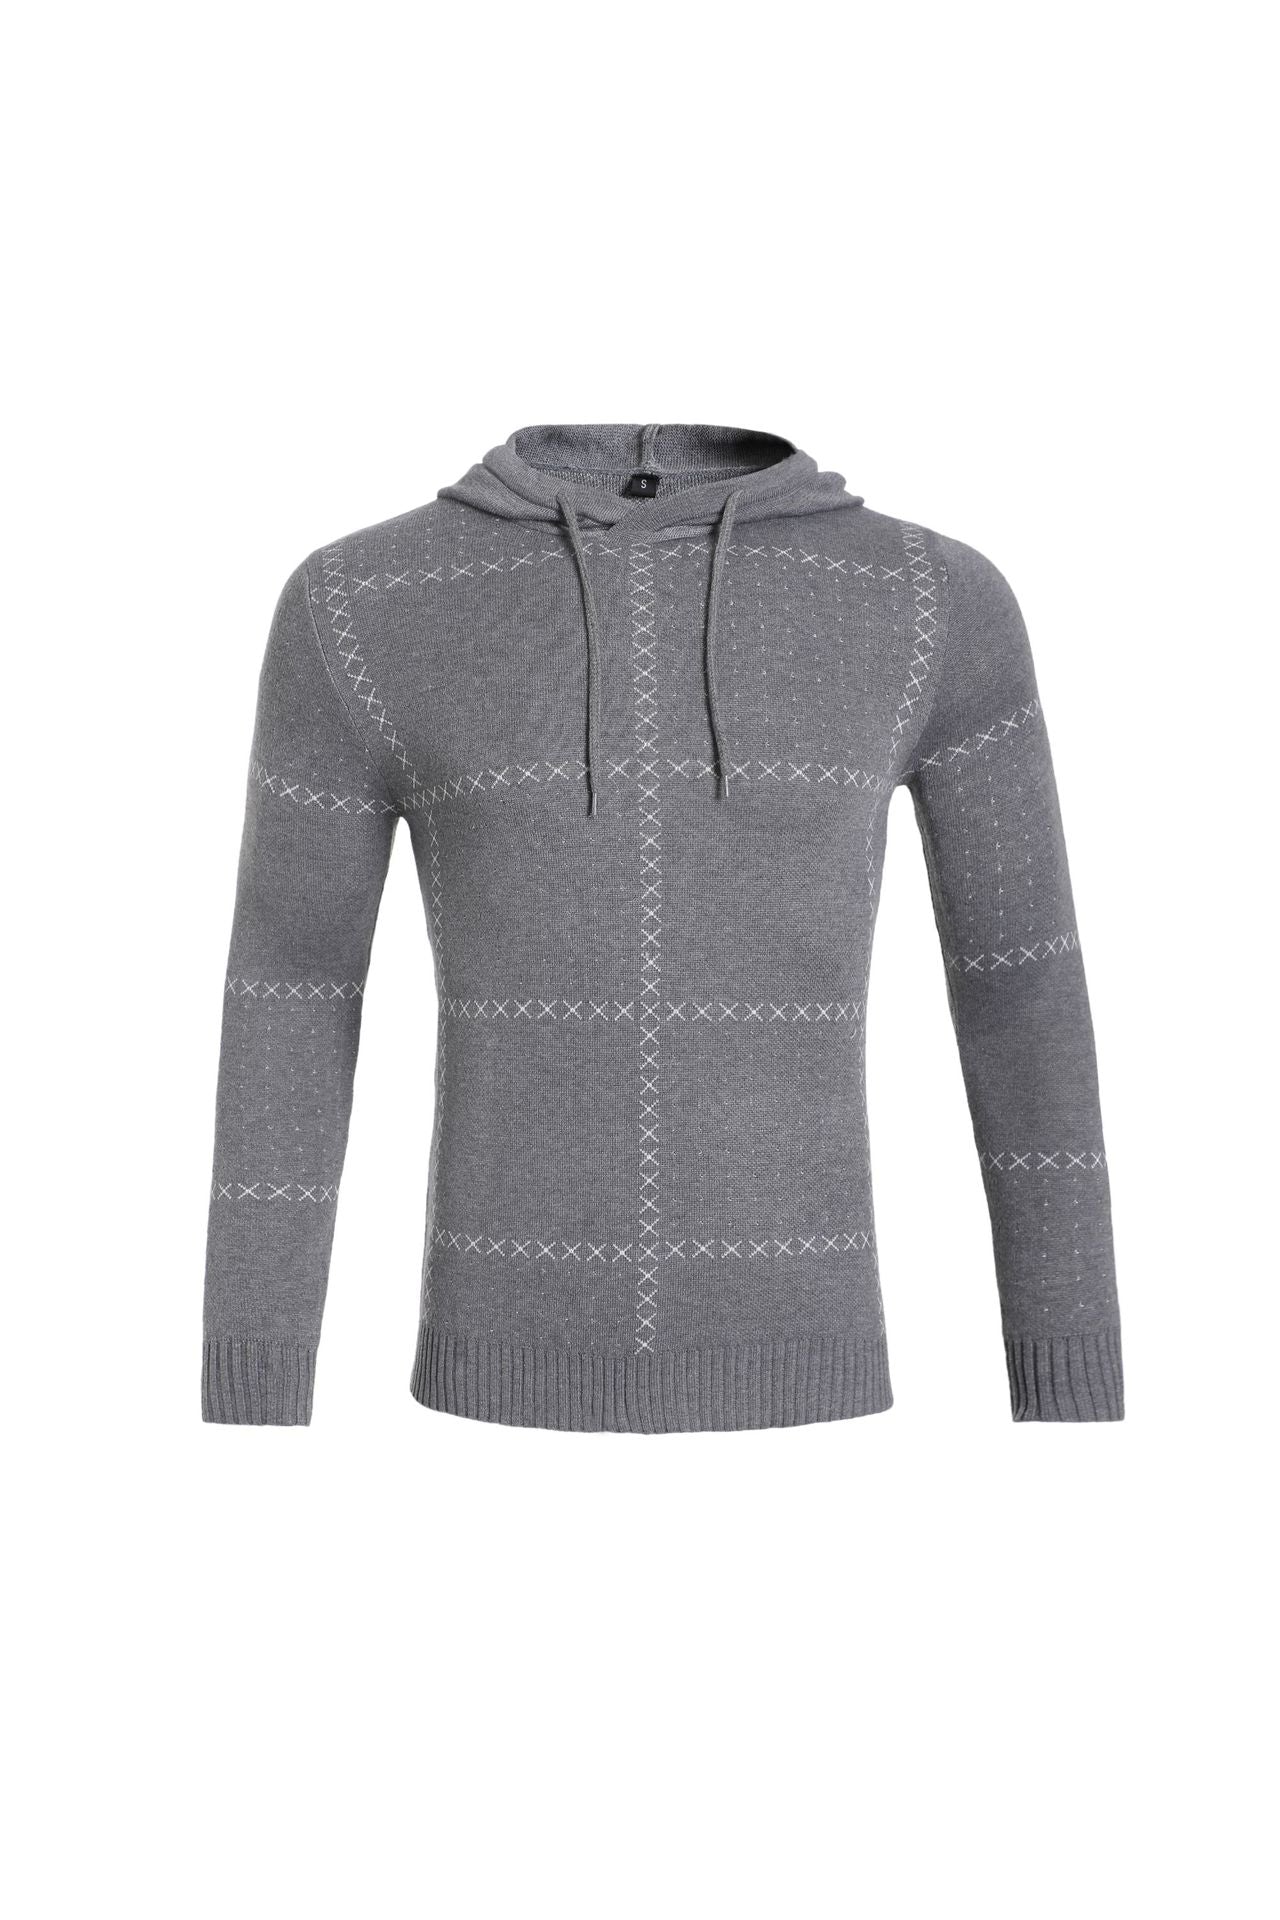 New Men's Knitwear Sweater Plaid Stitching Casual Trend Sports Men's Clothing